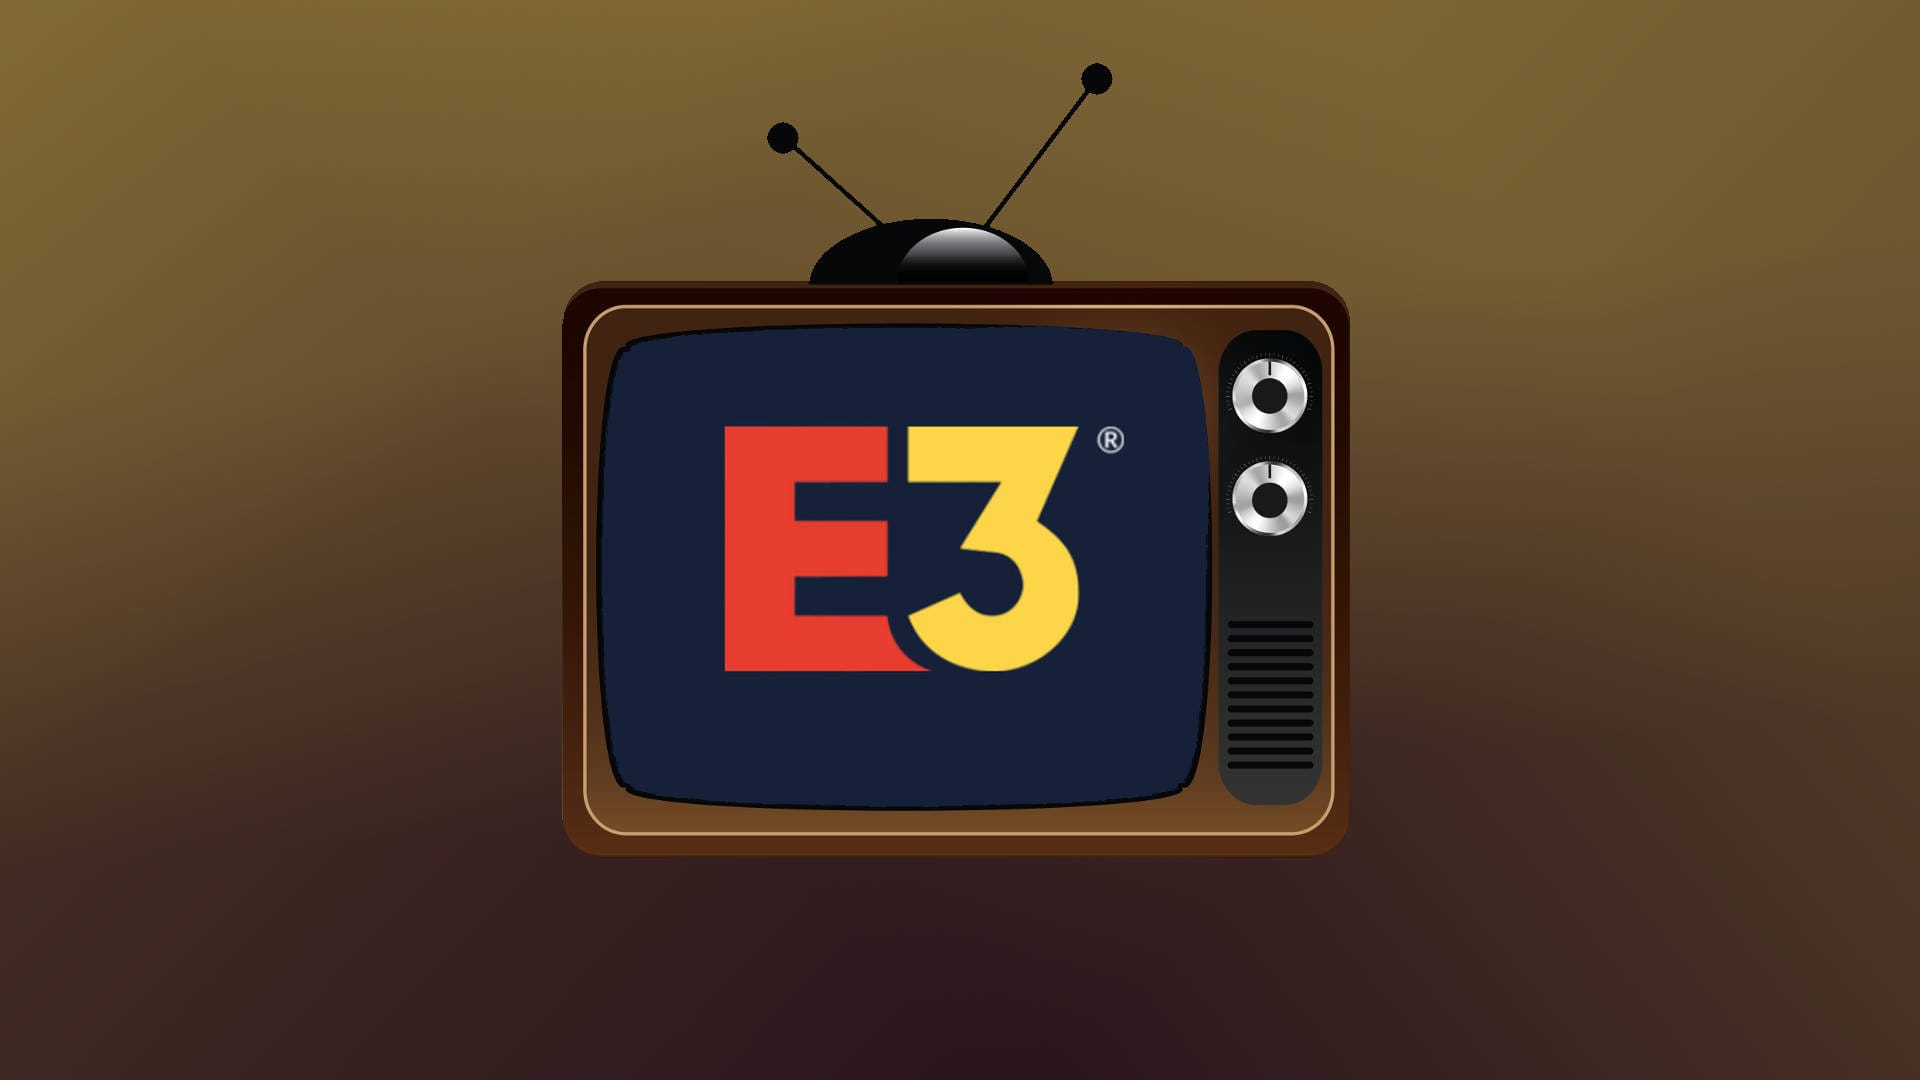 E3 Co-Streaming Program Geoff Keighley Rejected cover